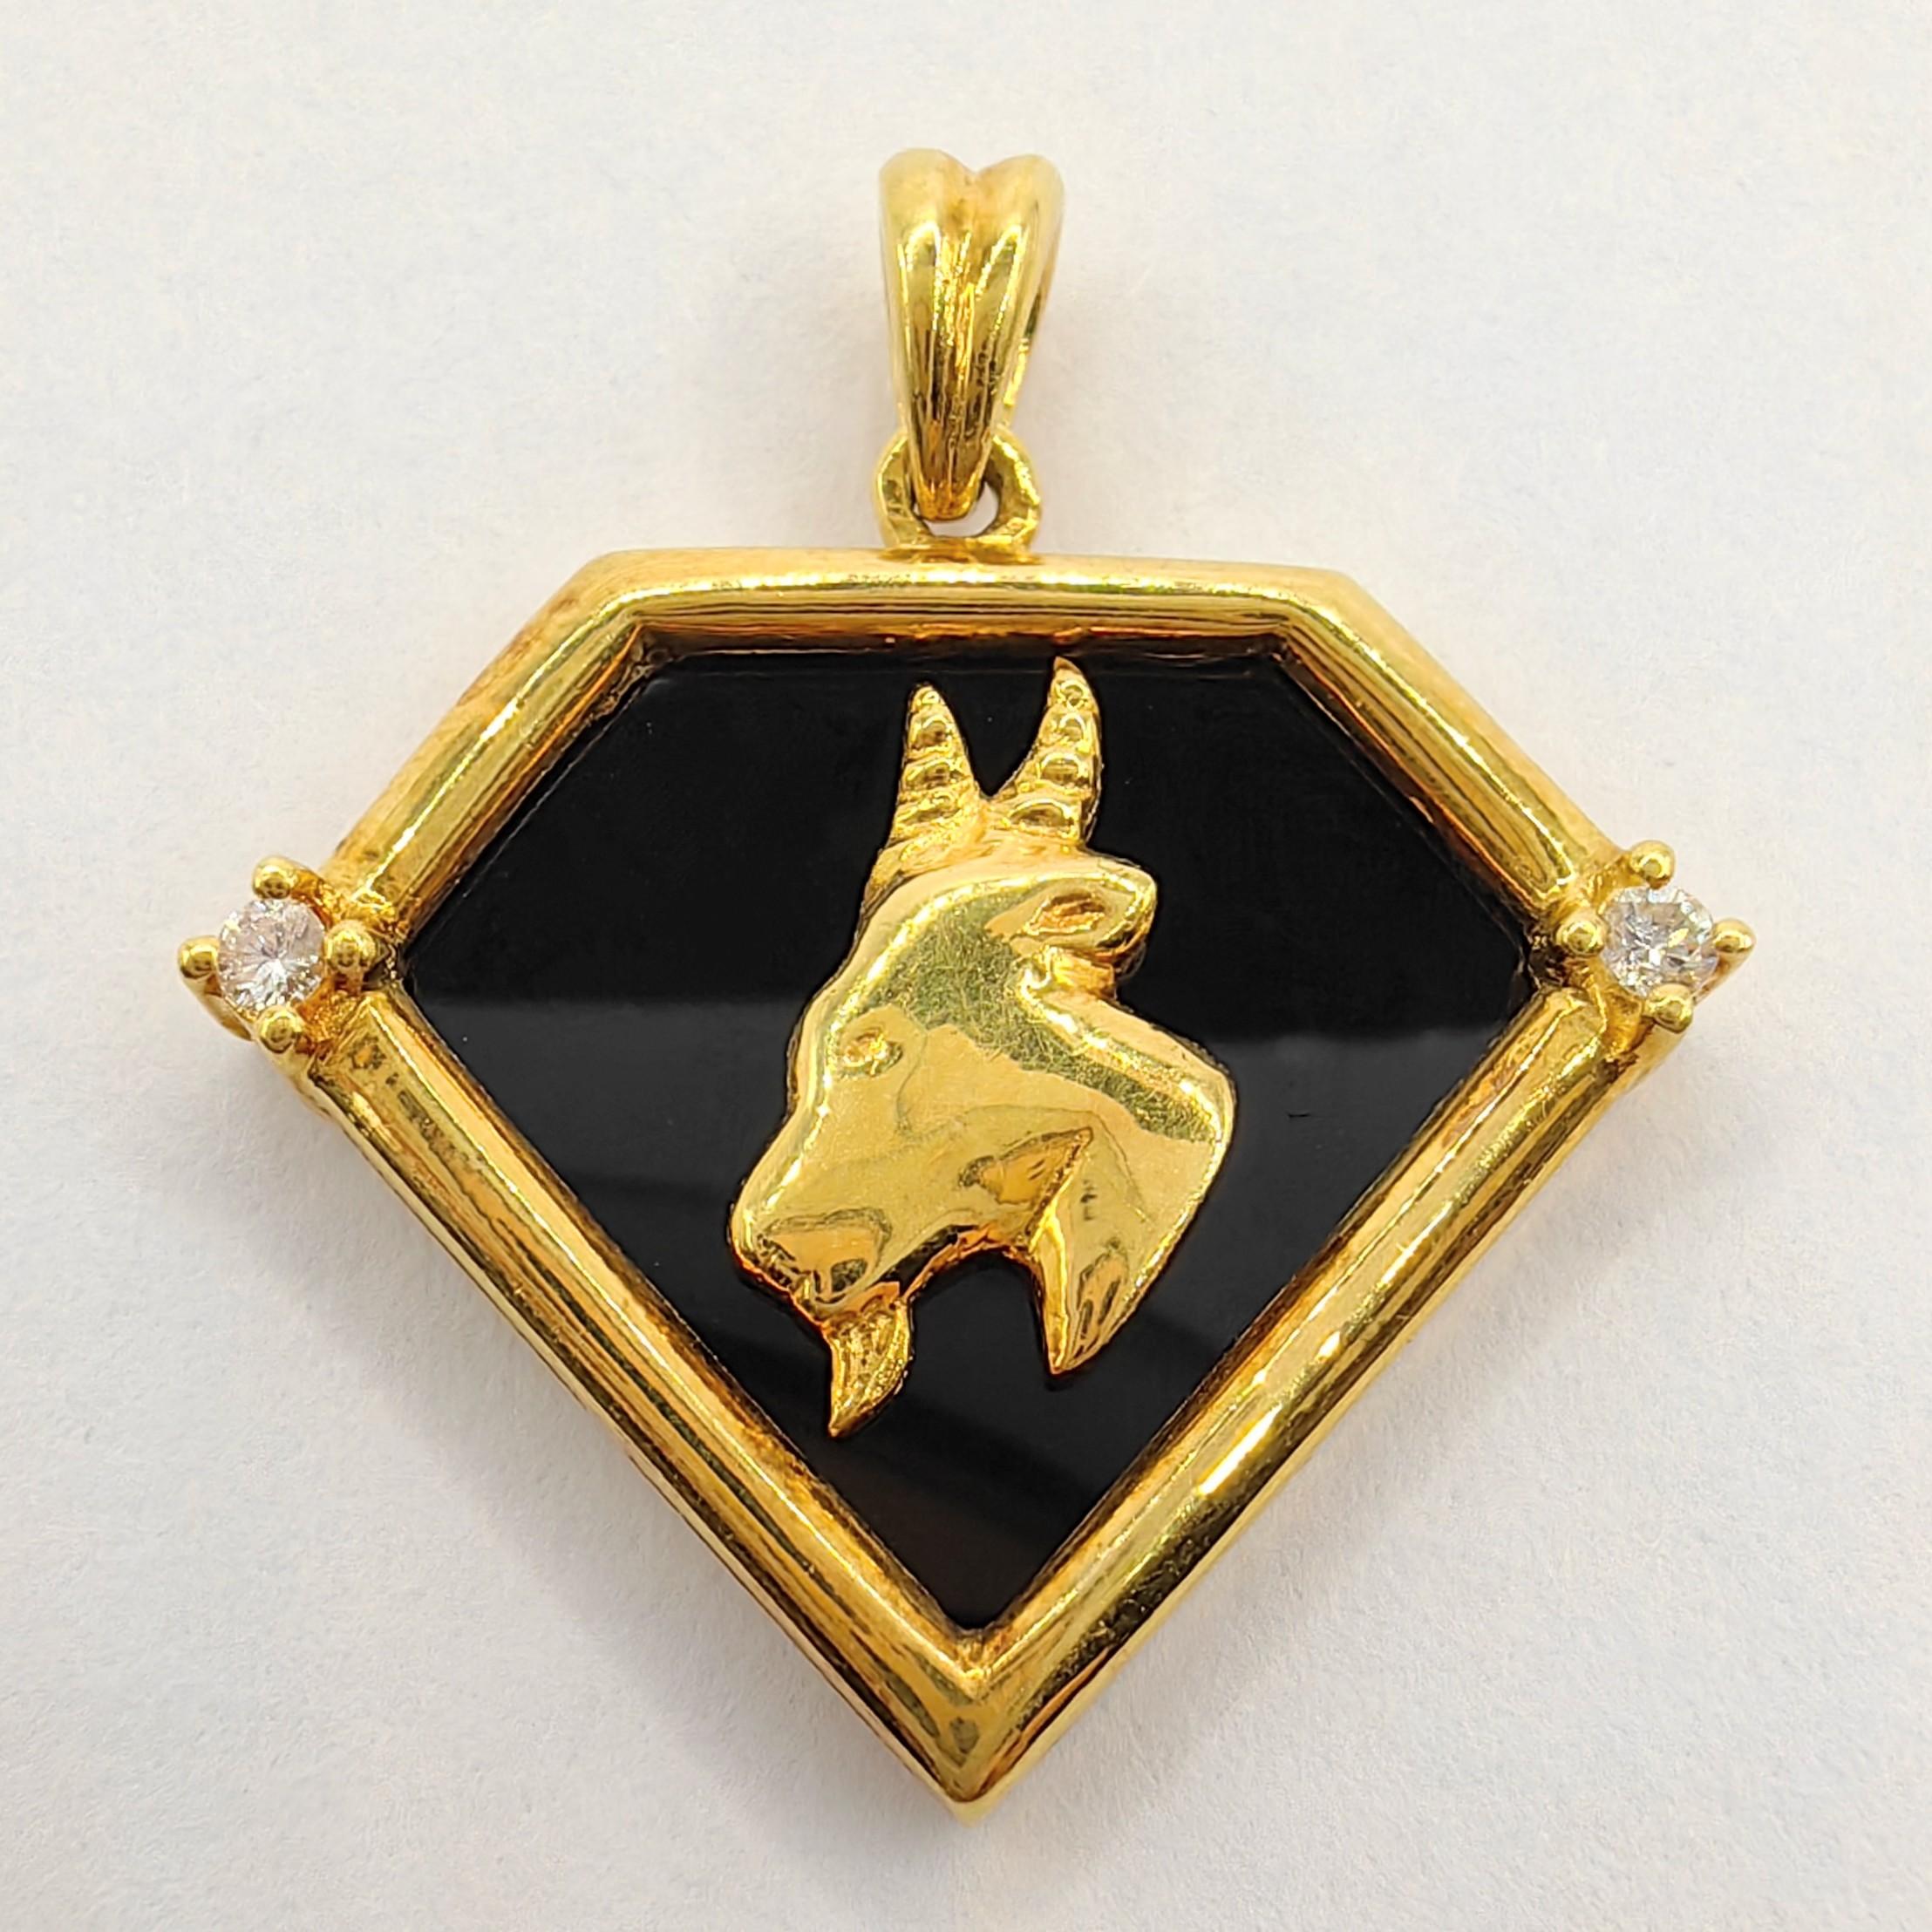 Introducing the Vintage 90's Capricorn Onyx Diamond Necklace Pendant in 20K Yellow Gold. This exquisite pendant combines the allure of a diamond-shaped black onyx with the timeless elegance of 20K yellow gold. The onyx is beautifully framed by a